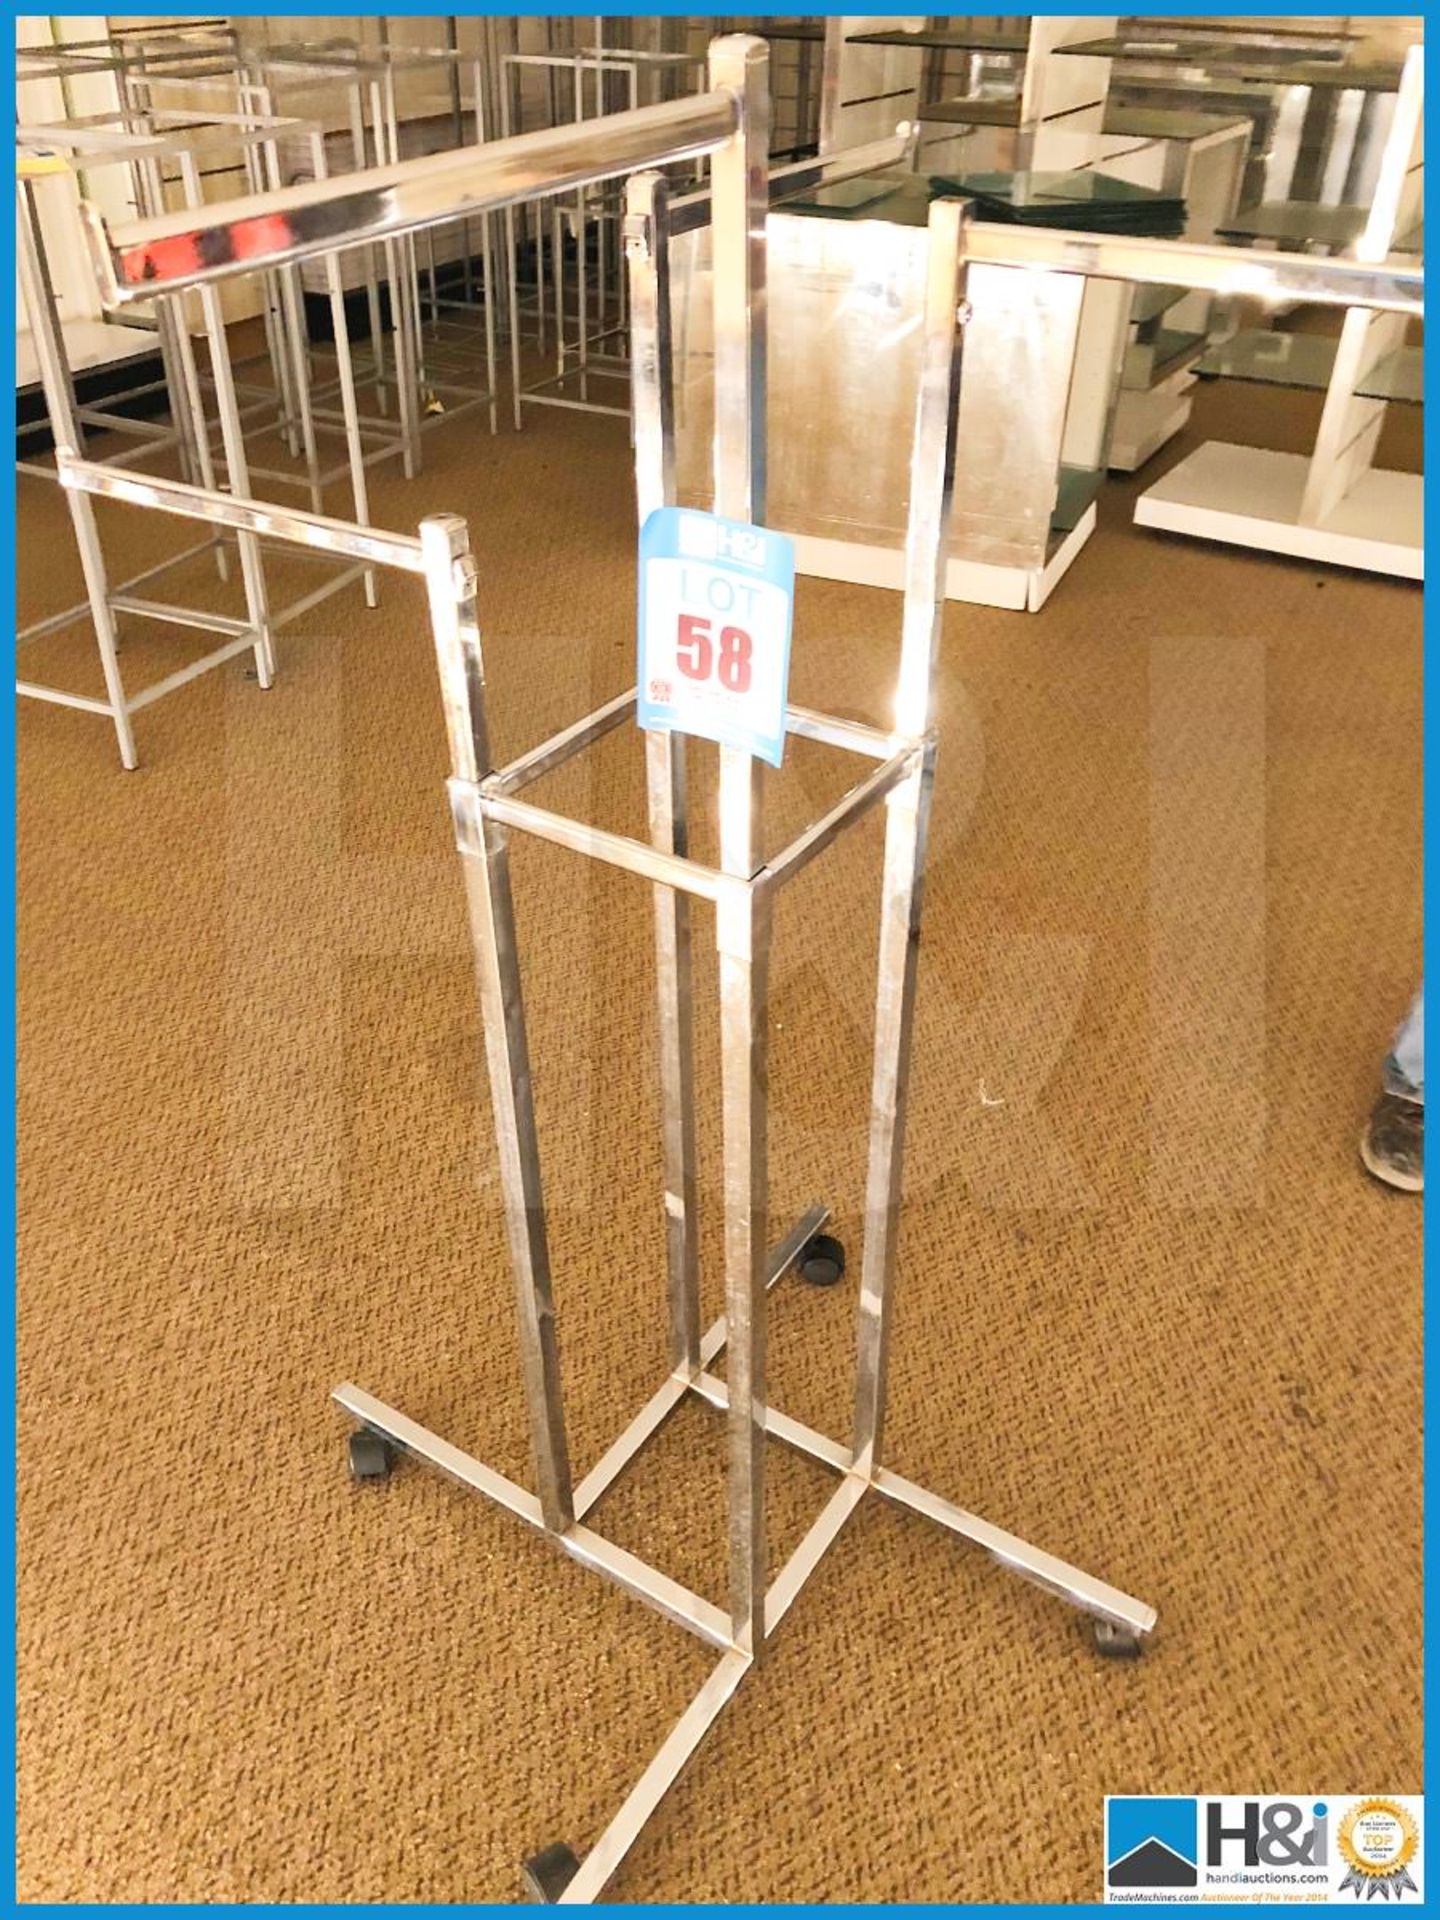 Chrome four armed clothes display stand on wheels free standing.